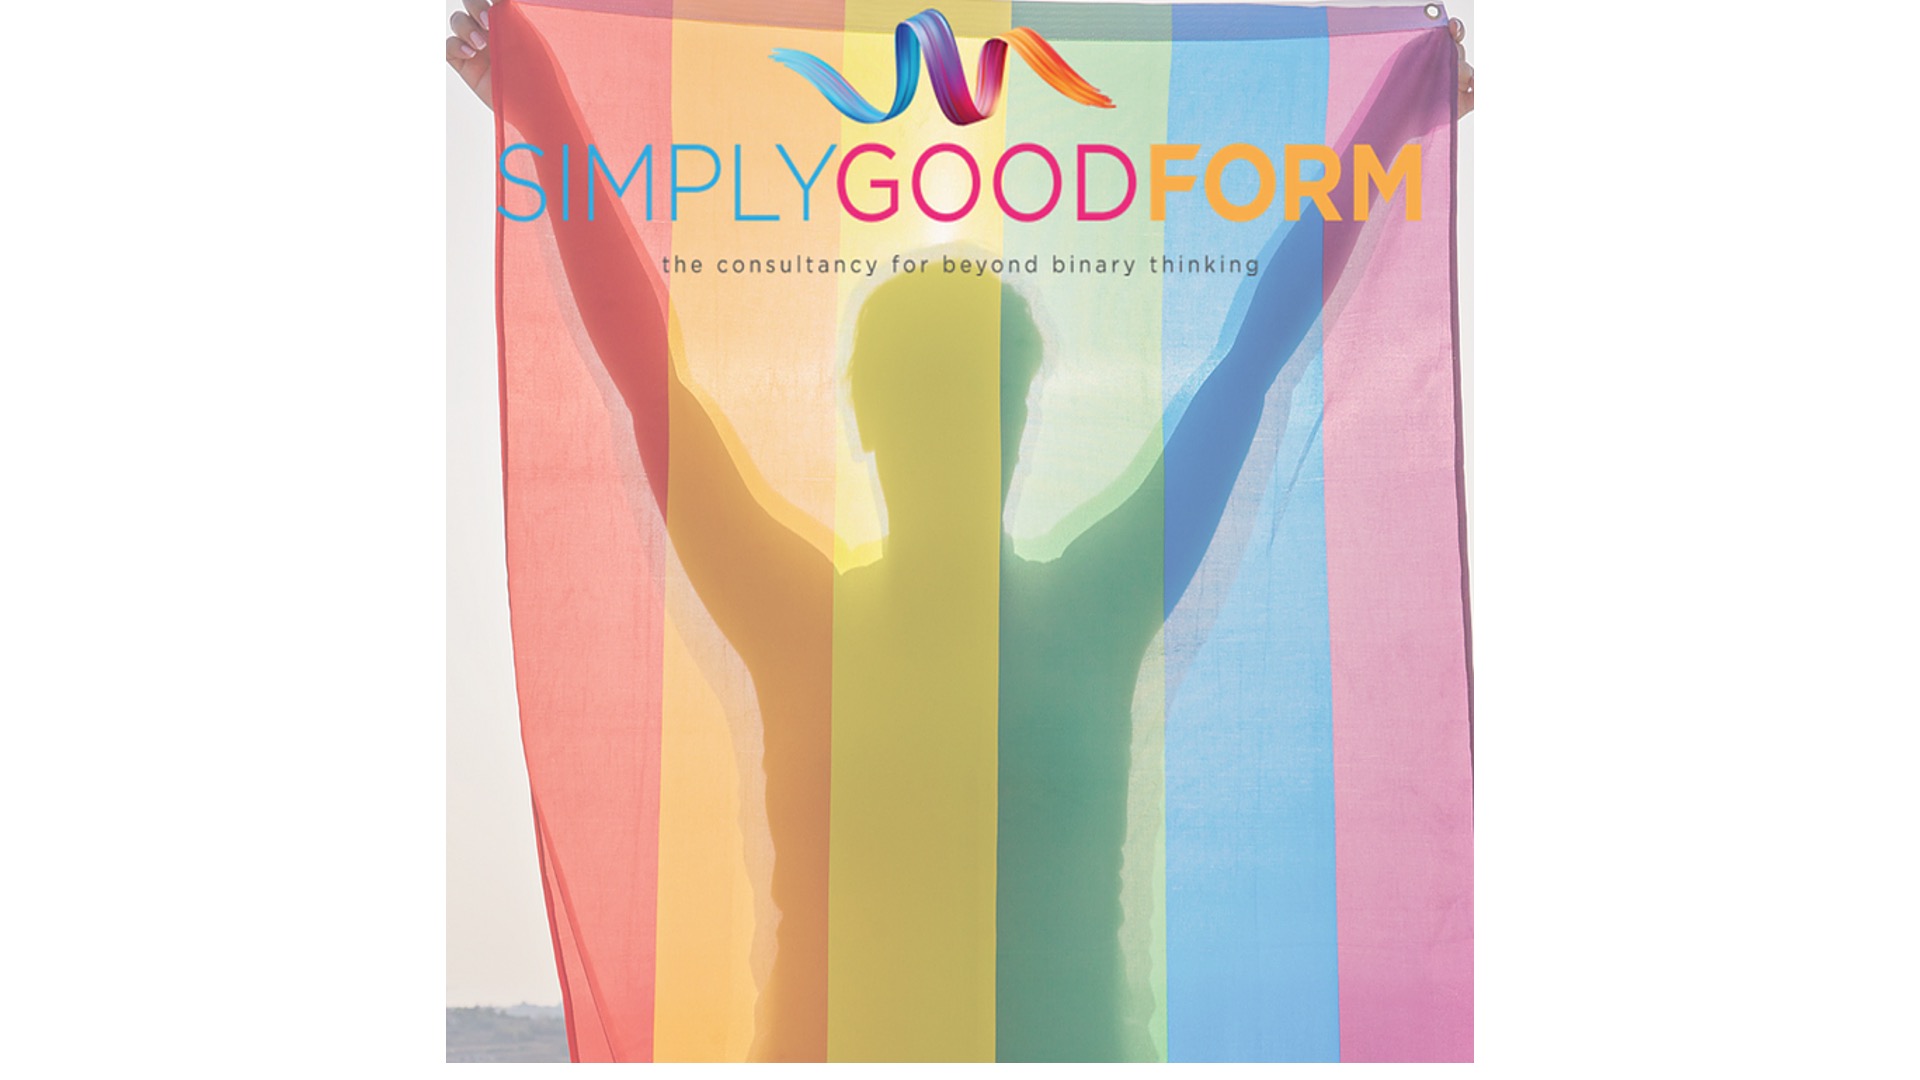 Simply Good Form vStore Category image diversity and inclusion